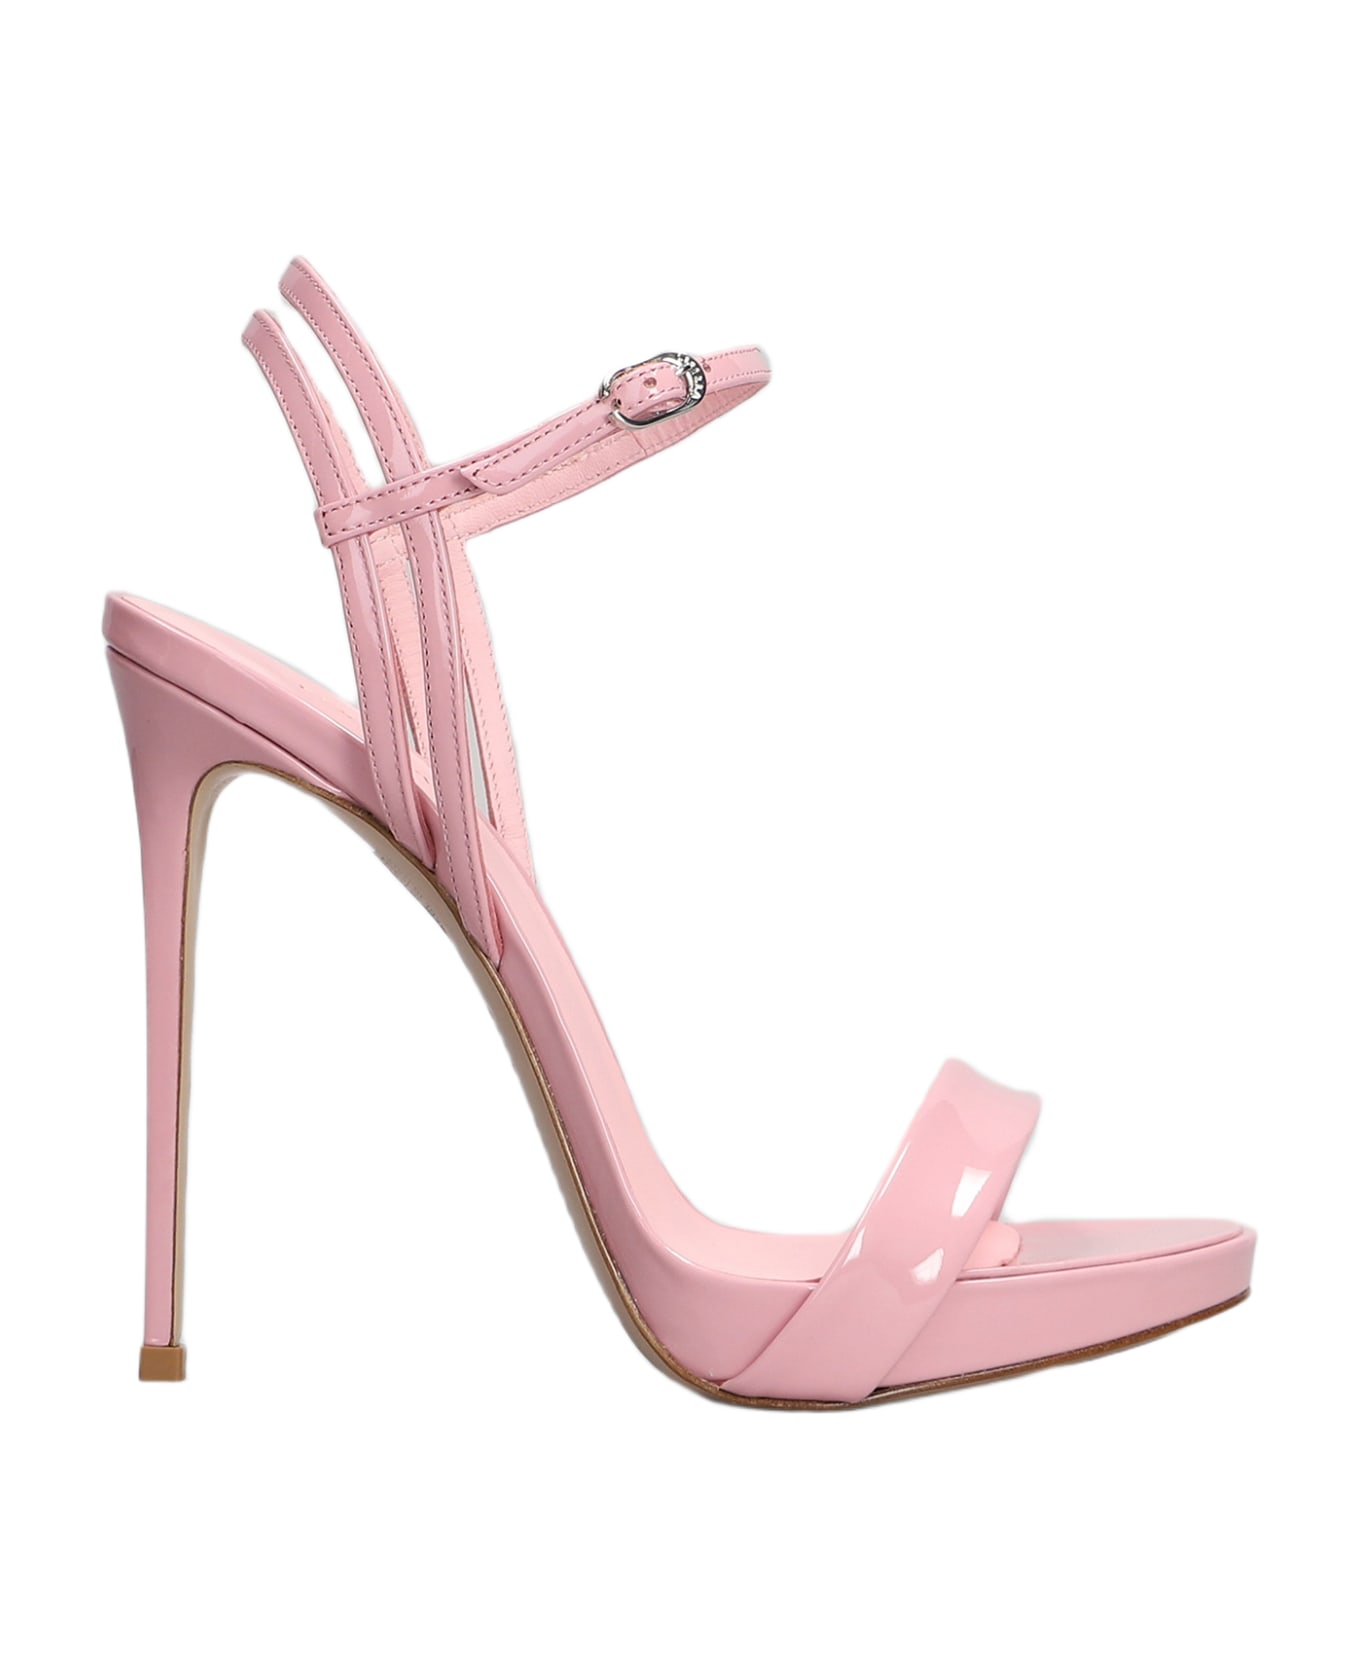 Le Silla Gwen Sandals In Rose-pink Patent Leather - rose-pink